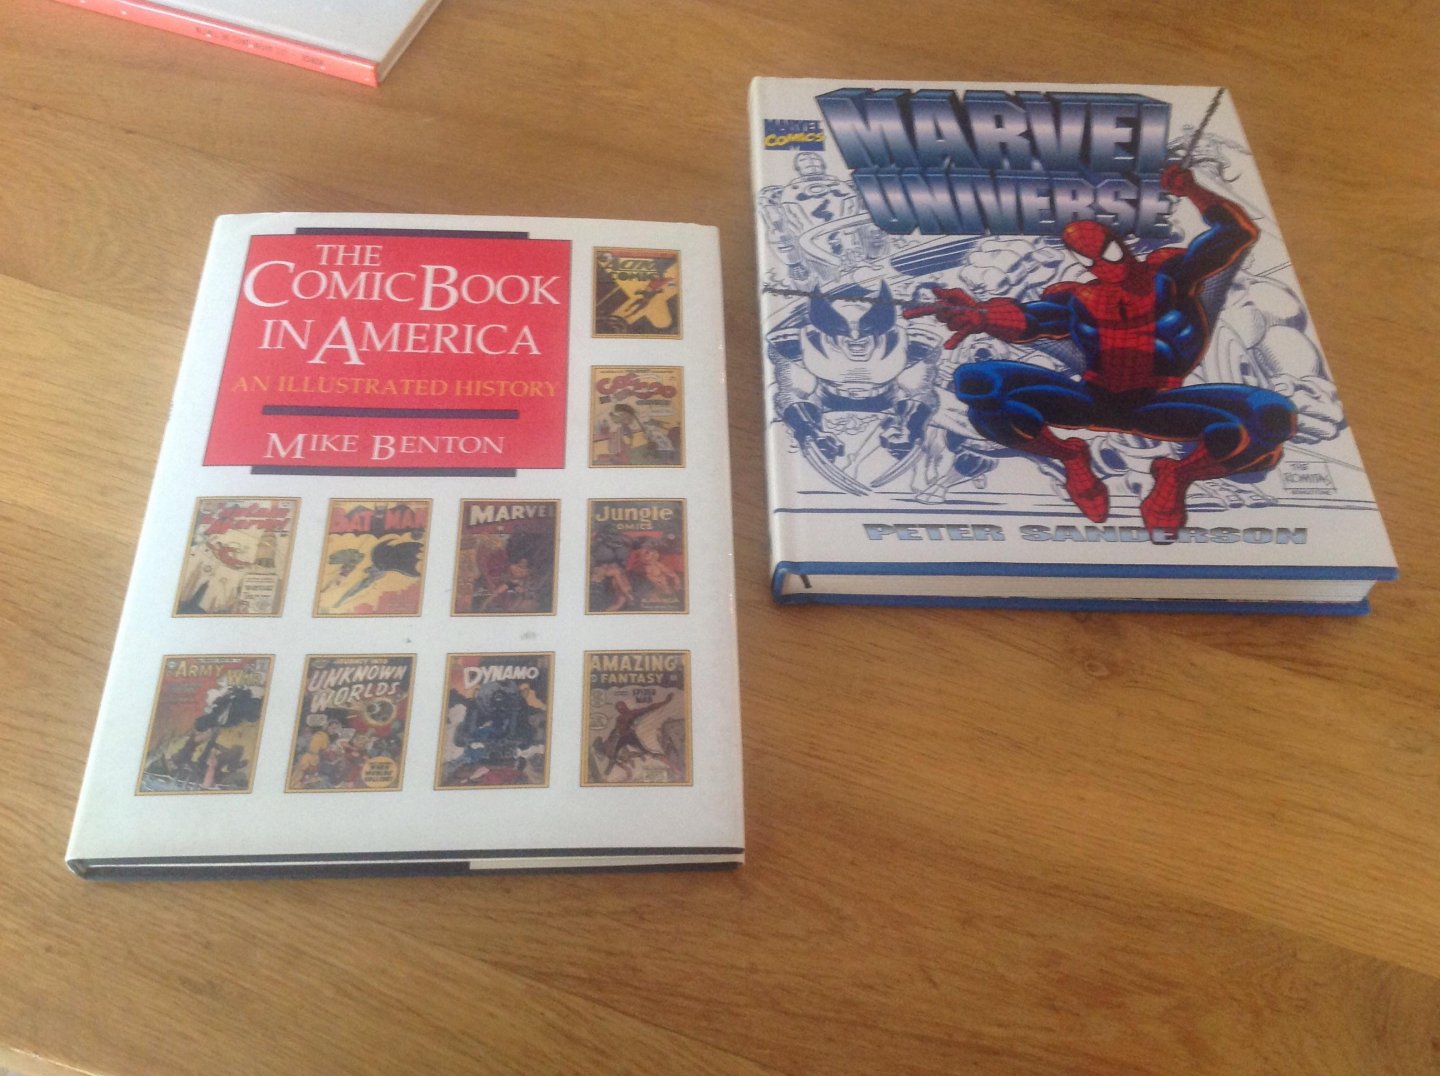 Mike Benton - The Comic Book in America An Illustrated History